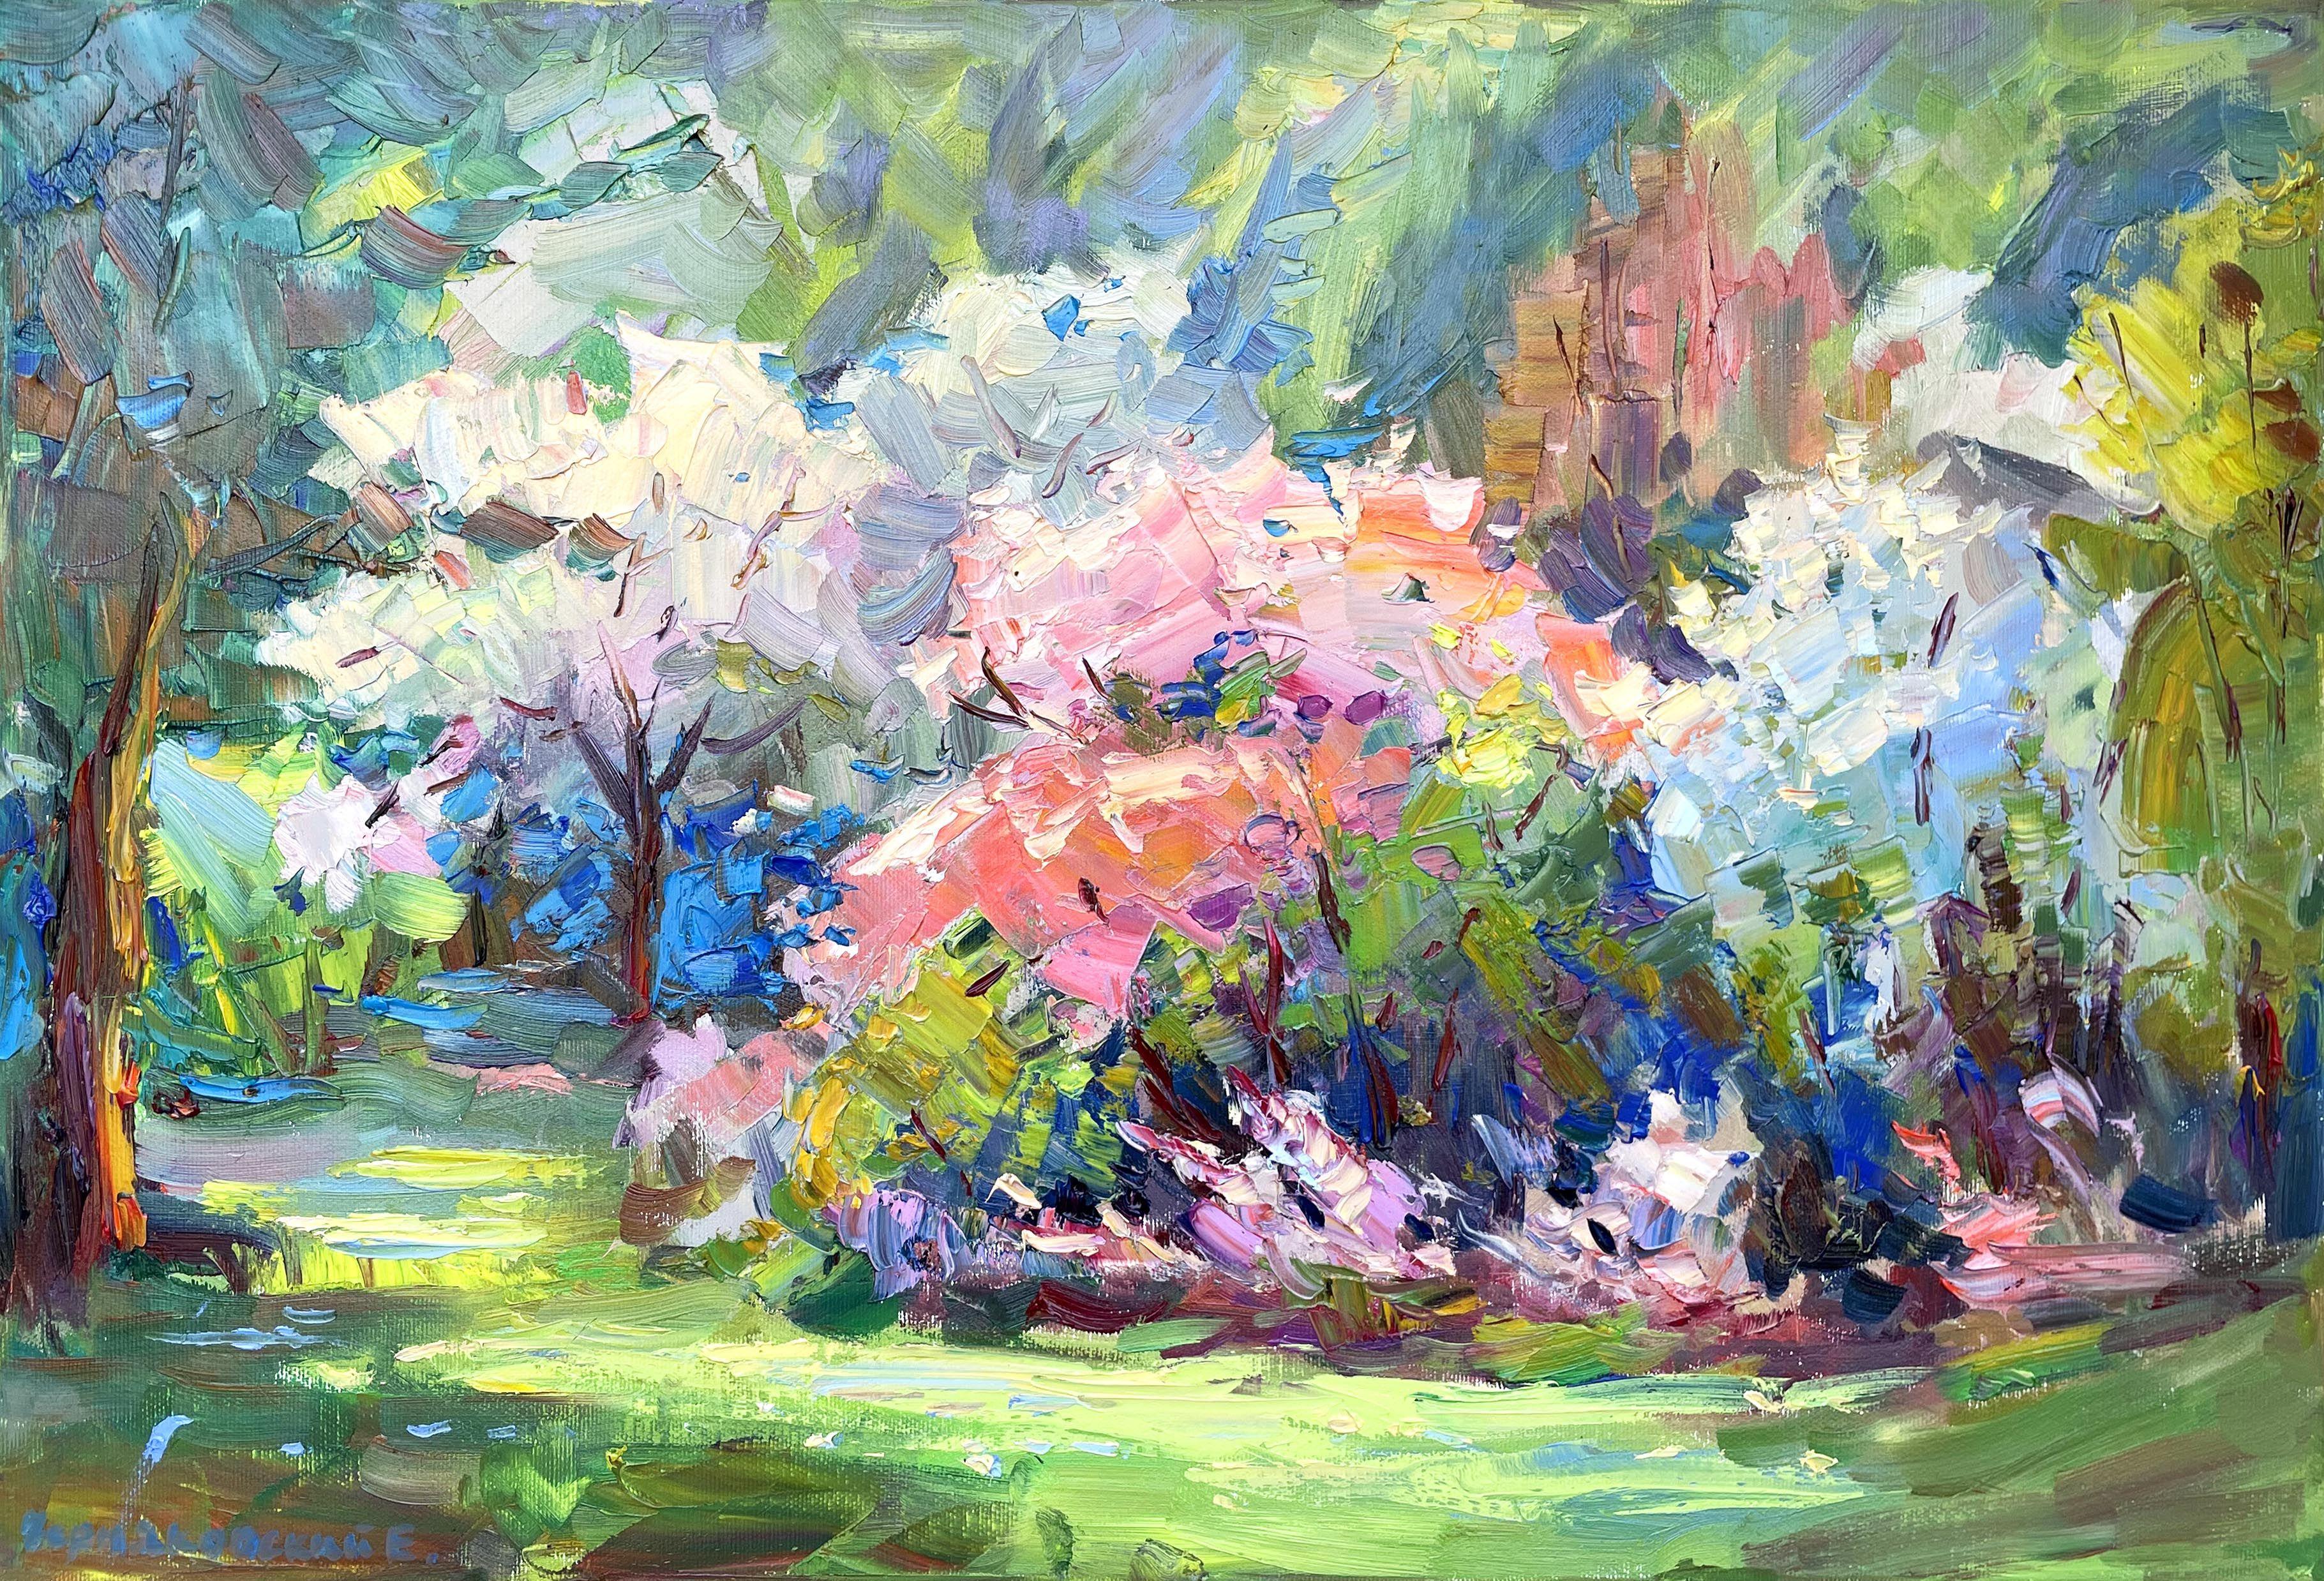 Original Oil painting by Ukrainian artist Evgeny Chernyakovsky    "Blooming garden"  40.0 X 60.0 CM / 15.7 X 23.6 IN  HIGH QUALITY oil on canvas  Signed on the front and back  Dated 2022  Good condition  GUARANTEE OF AUTHENTICITY   :: Painting ::